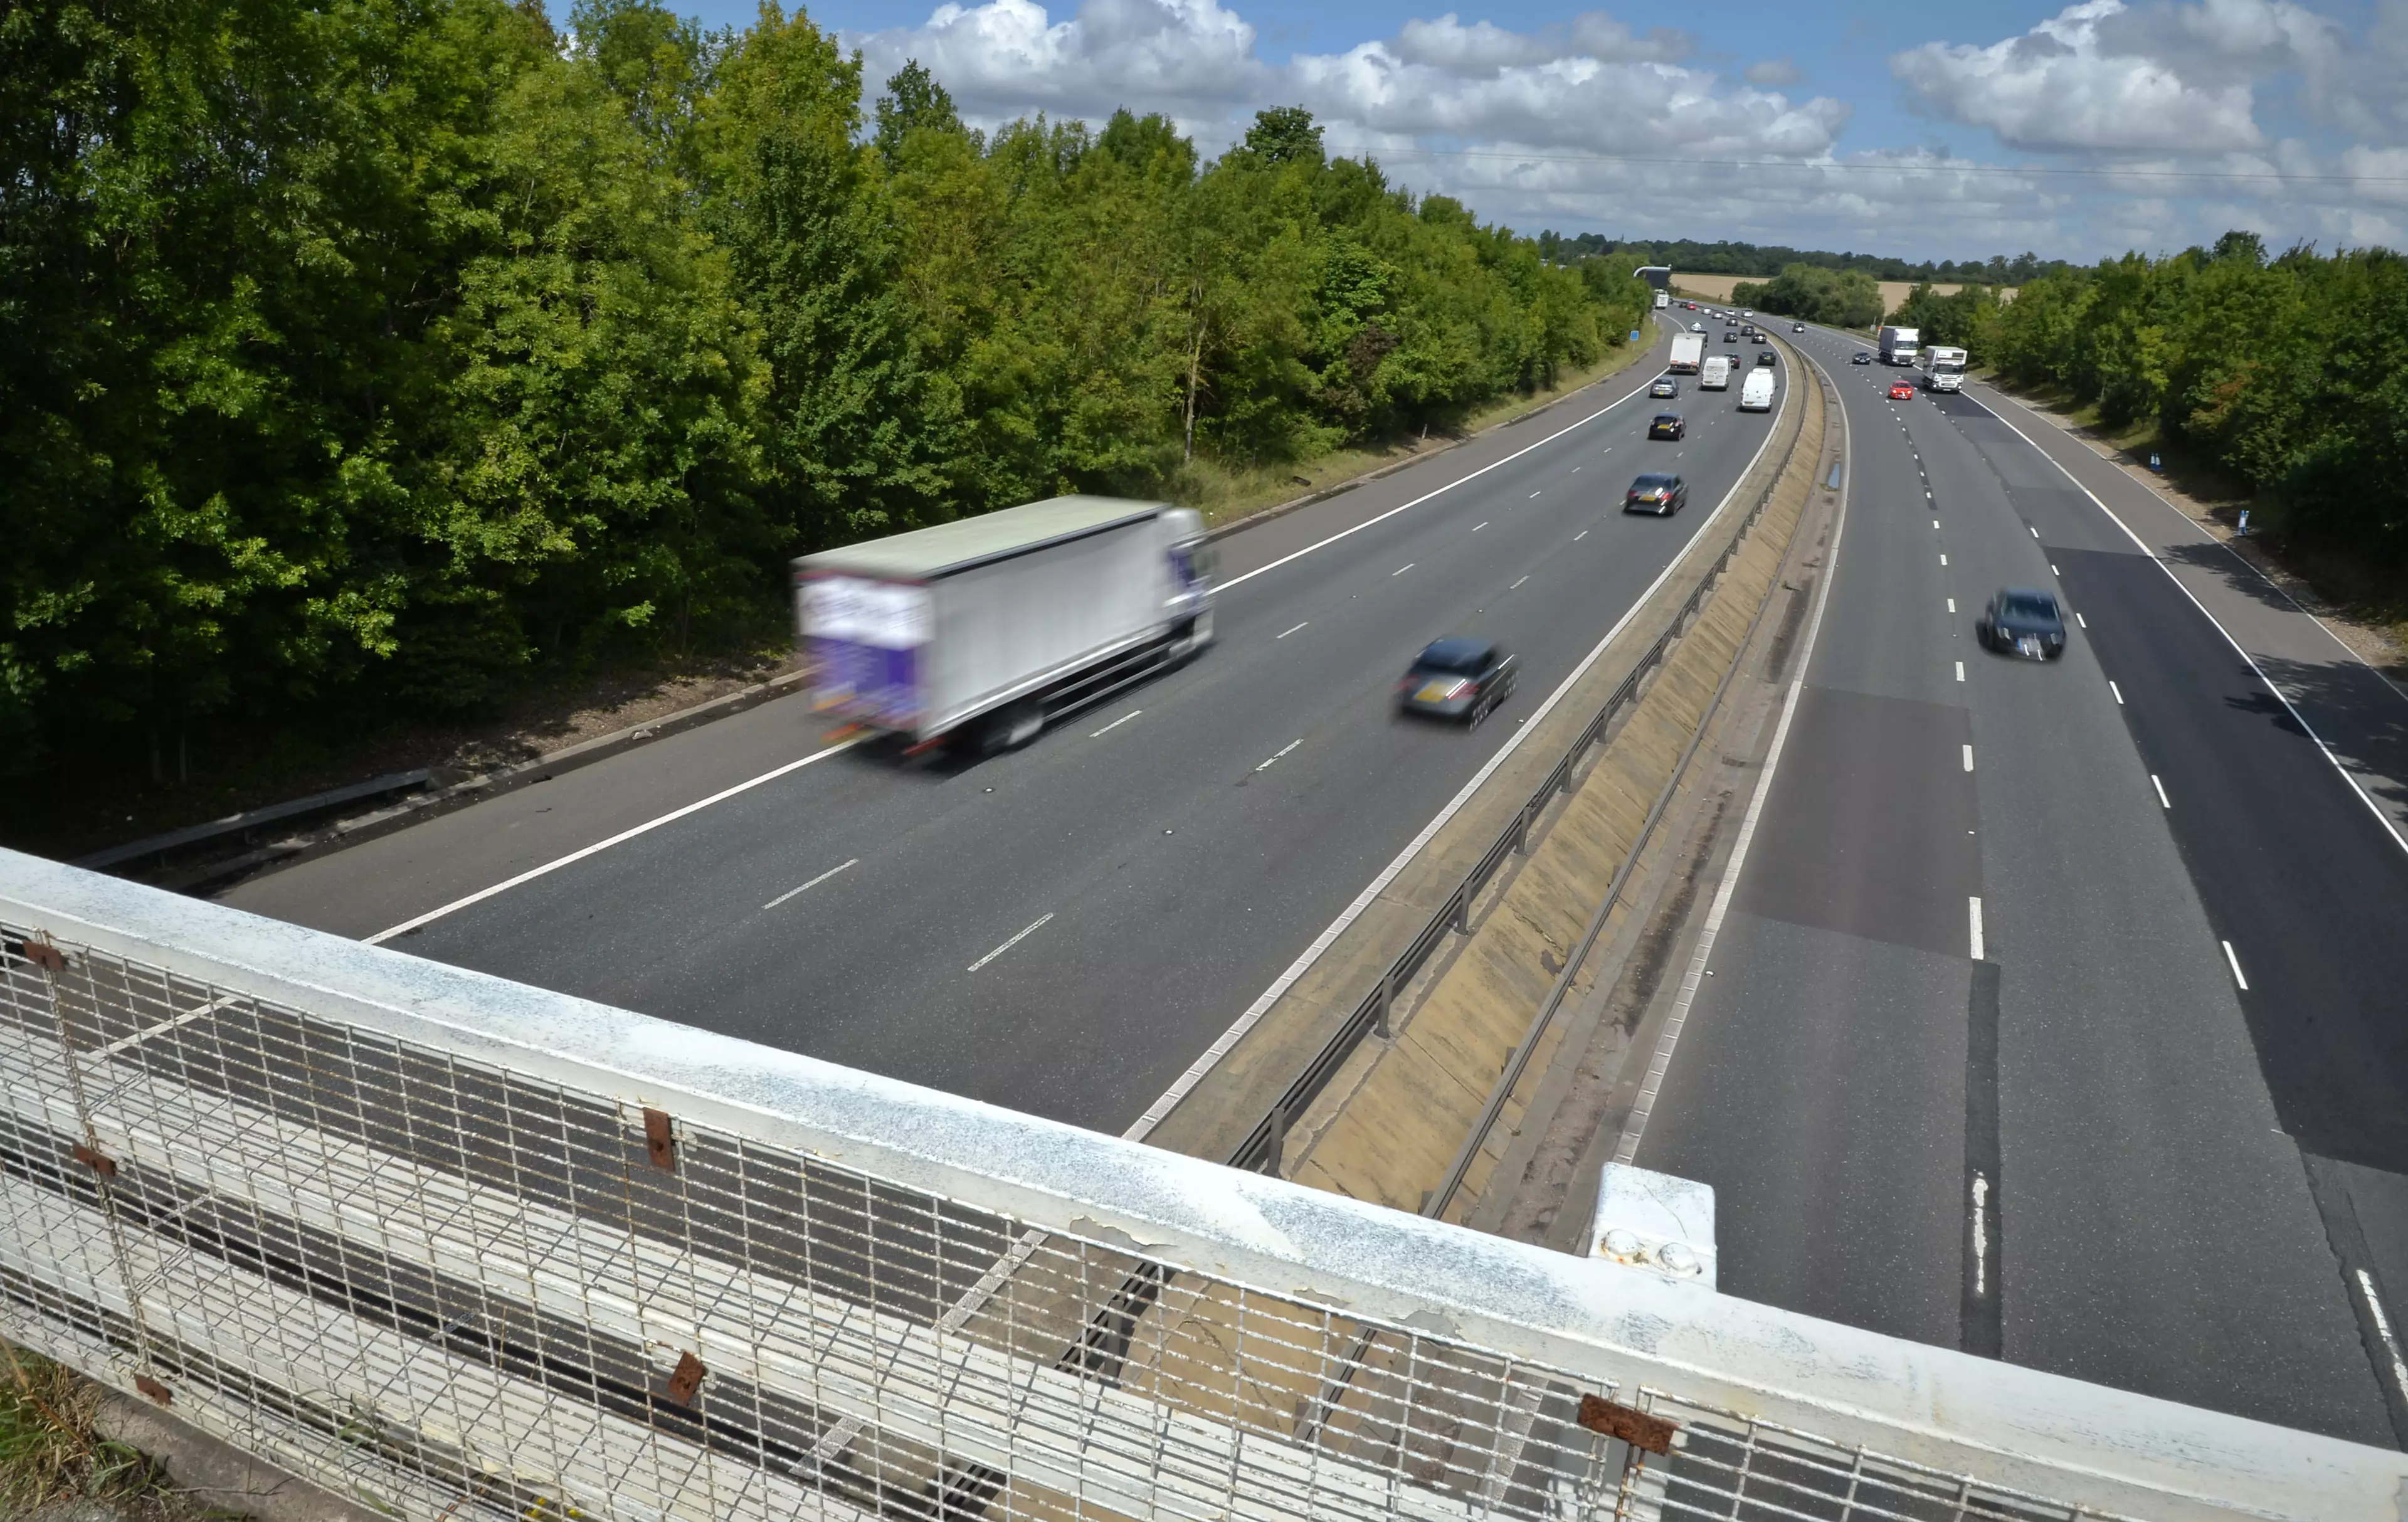 Parts of the M11 are hotspots for rubbish thrown from cars.